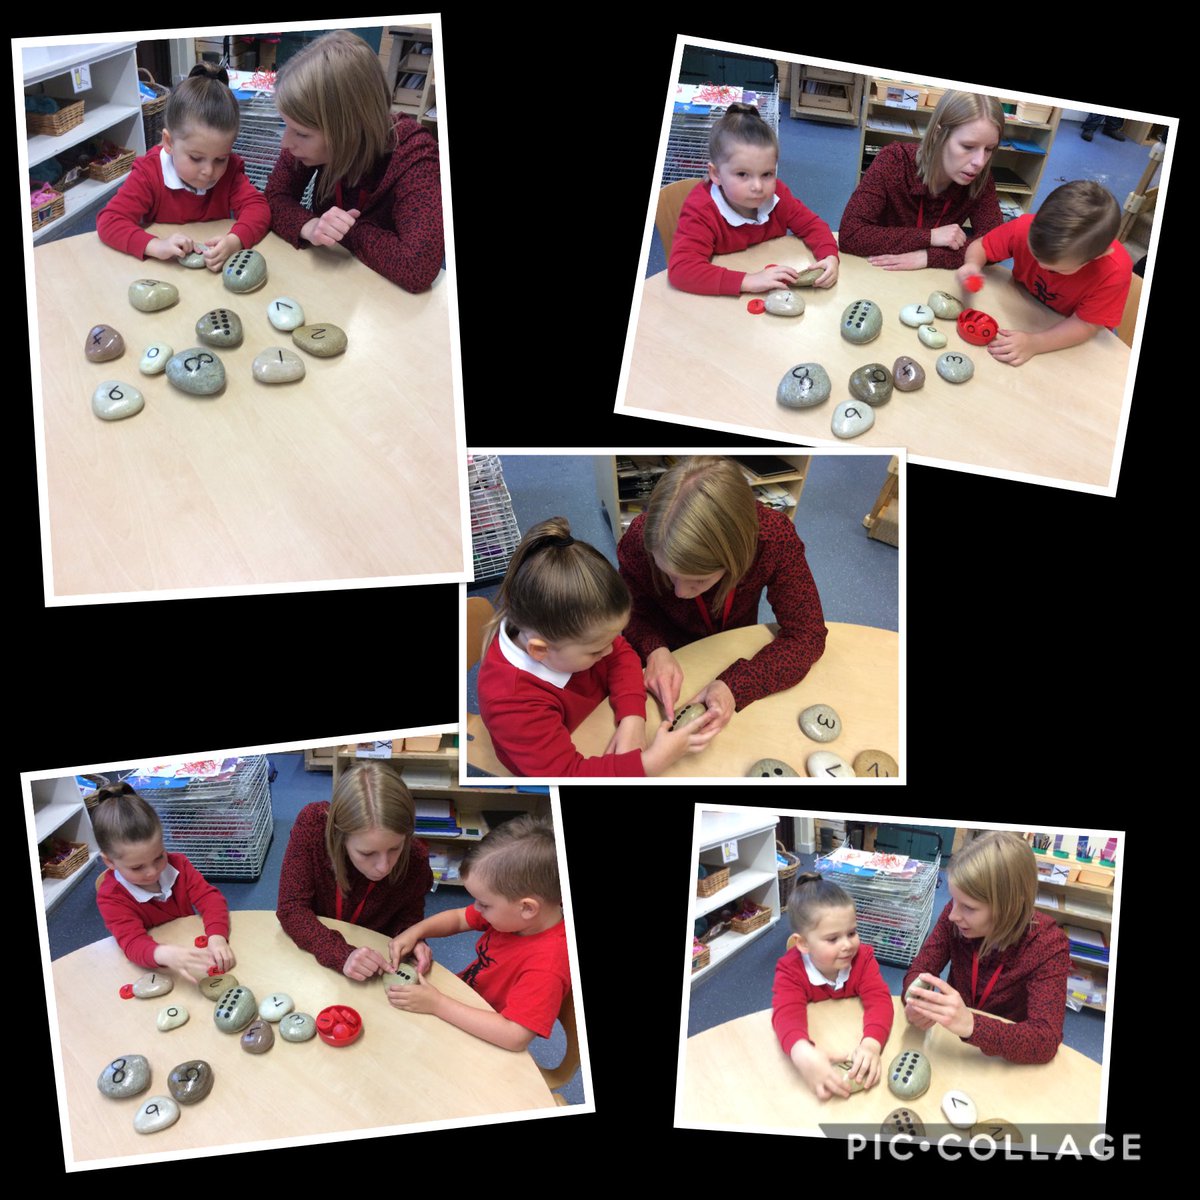 Our ELC Trainee engaging with our young learners supporting and developing their early numeracy skills using everyday resources.The stones new to our learning environment this morning. Number recognition, sorting & matching.⁦#earlynumeracy @ElccClacks⁩ ⁦@ELCScotGov⁩